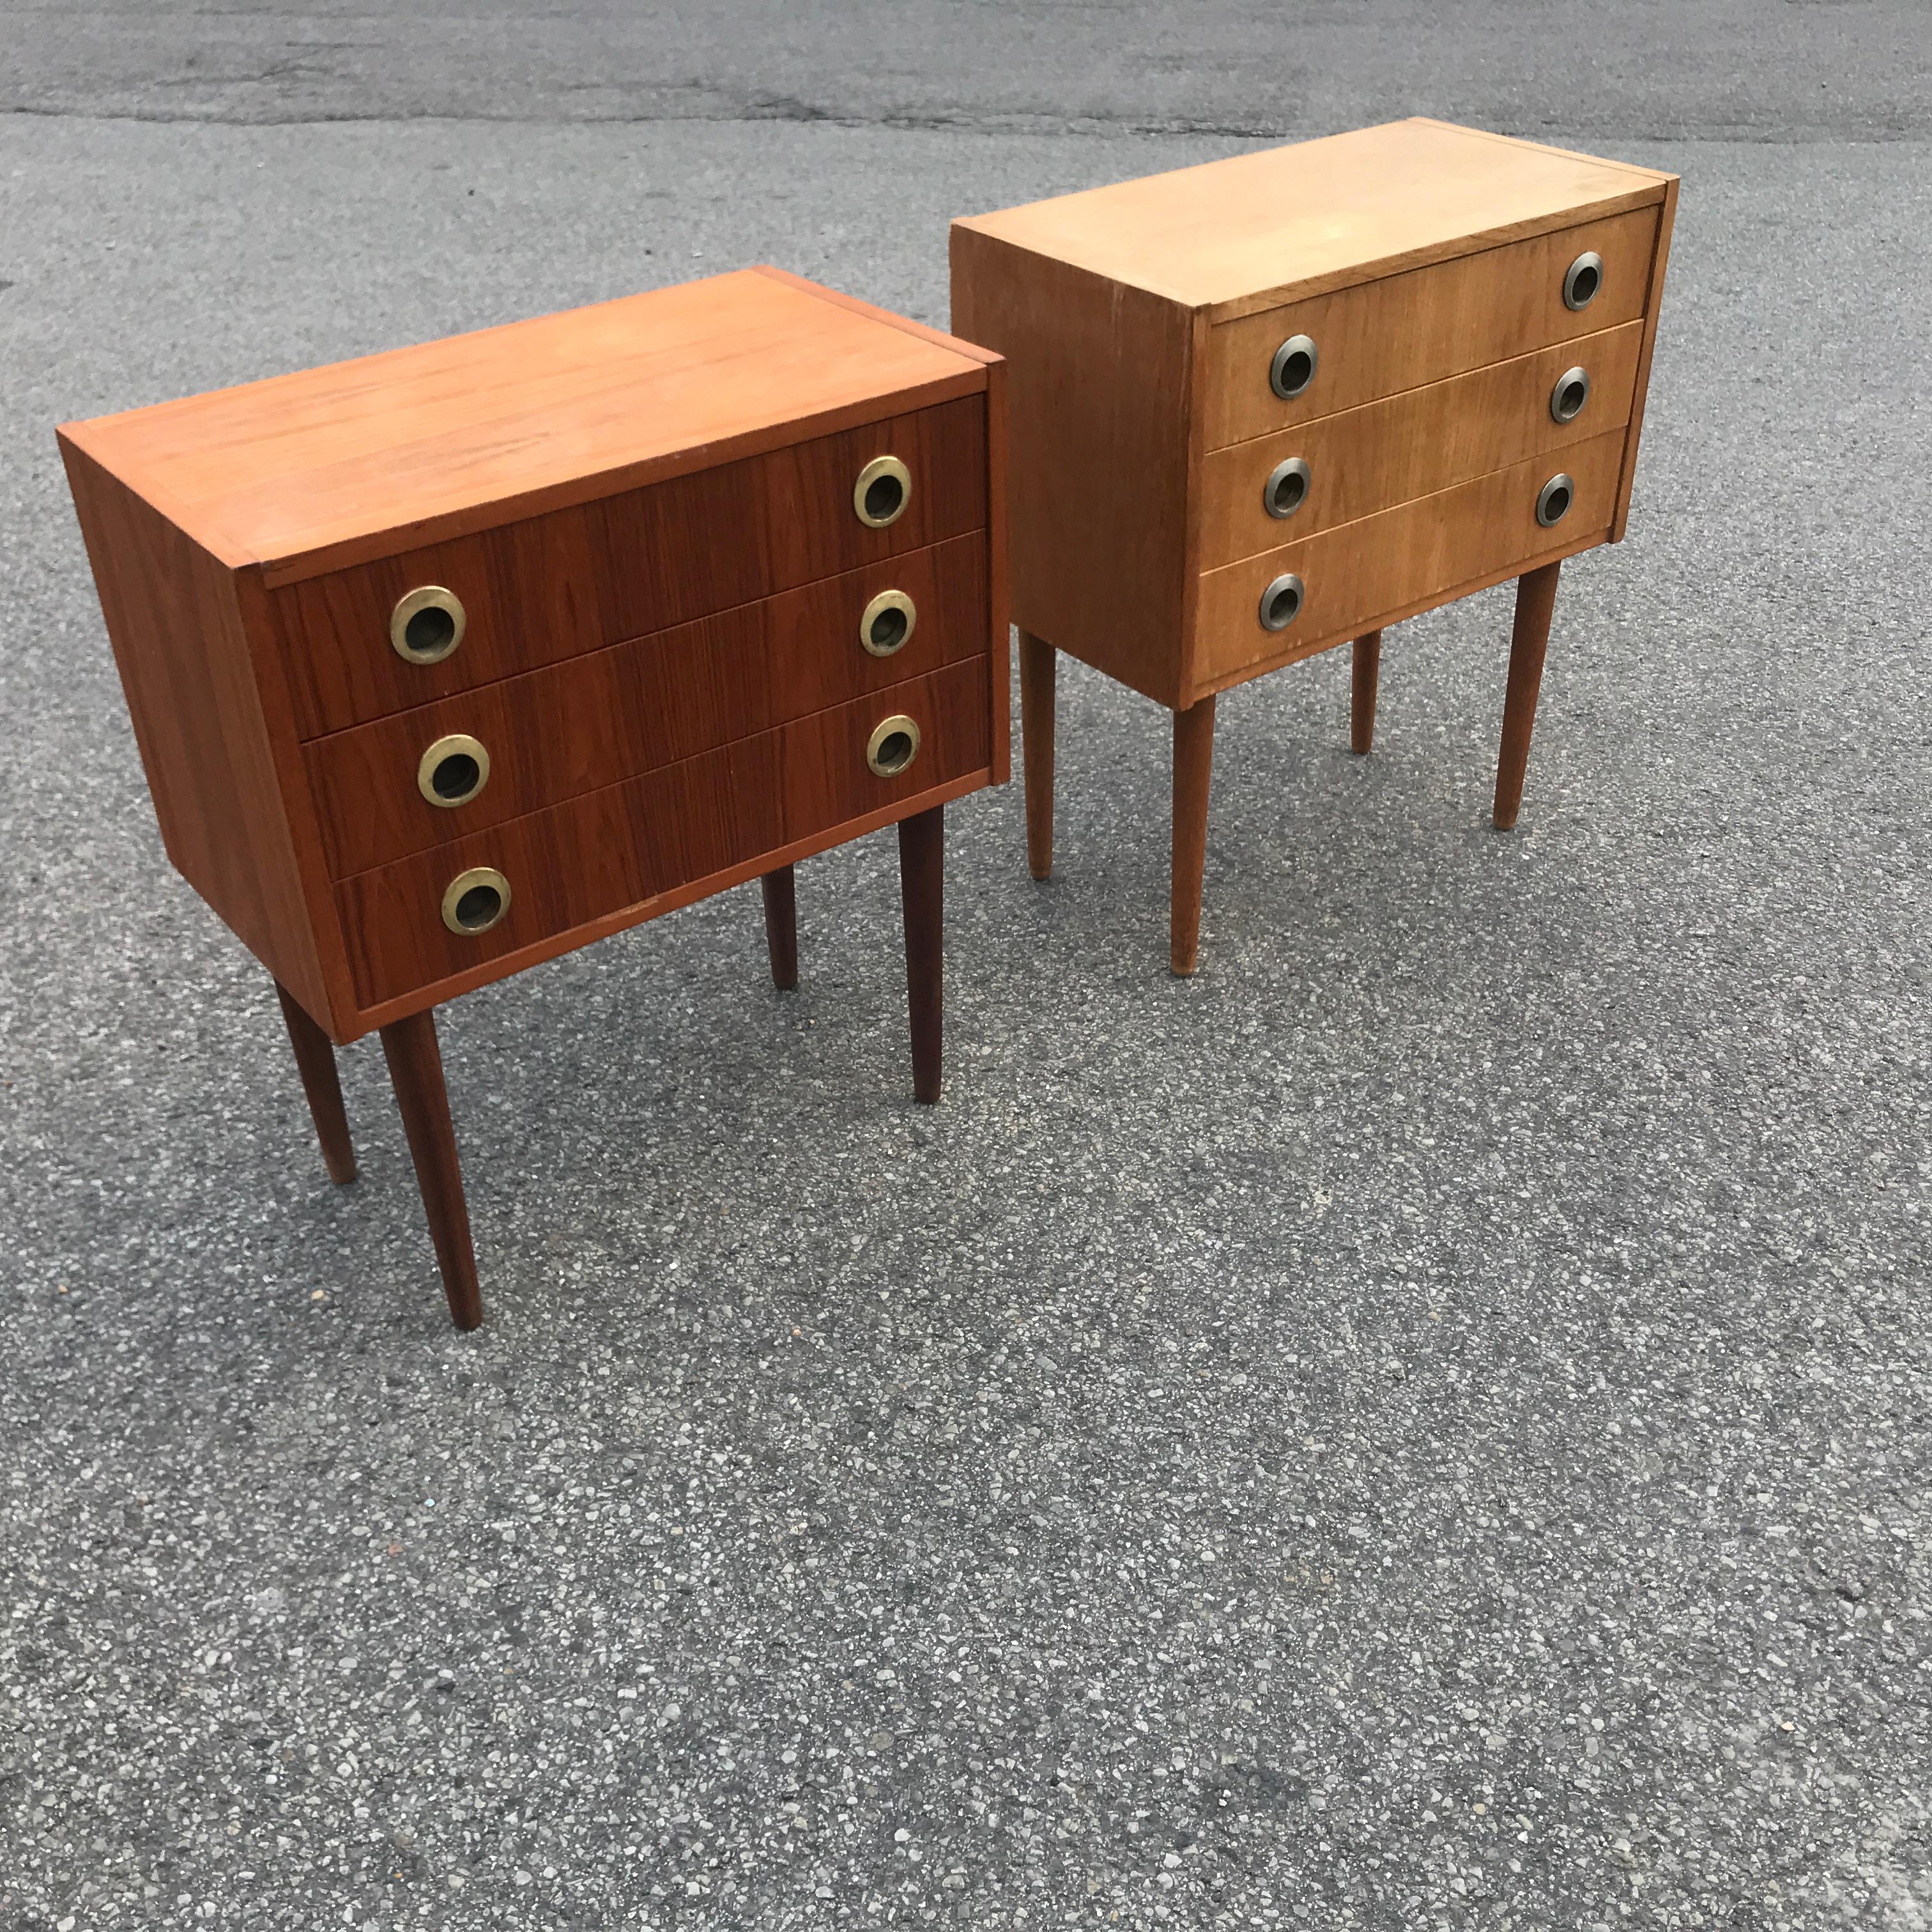 A set of Mid-Century Modern dressers. One in teak and one in oak. Simple and in good original shape from 1960s.